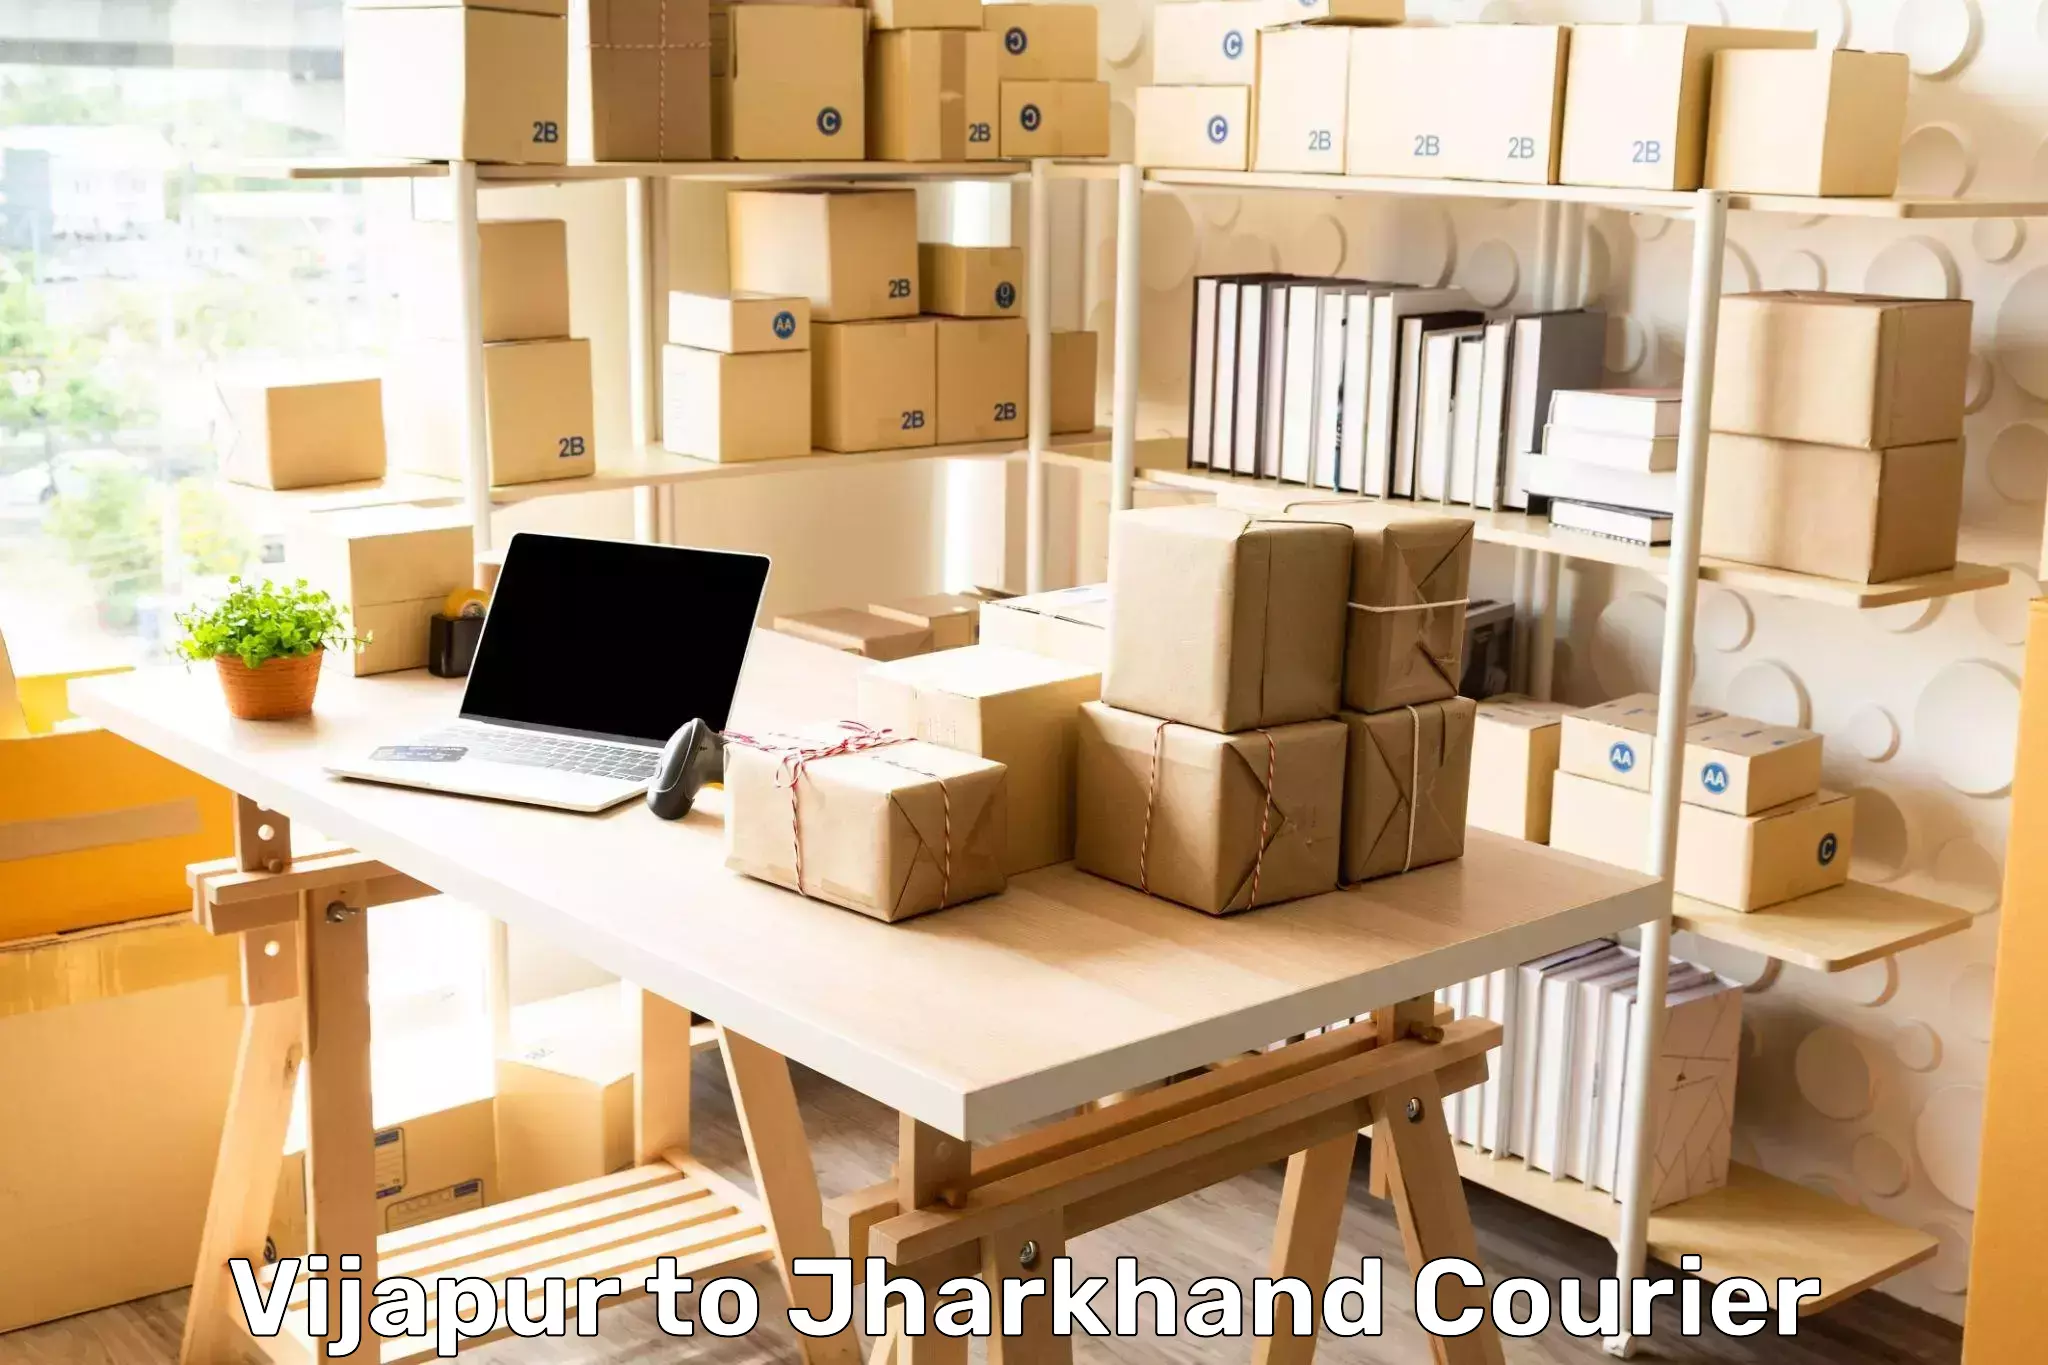 Supply chain delivery Vijapur to Jharkhand